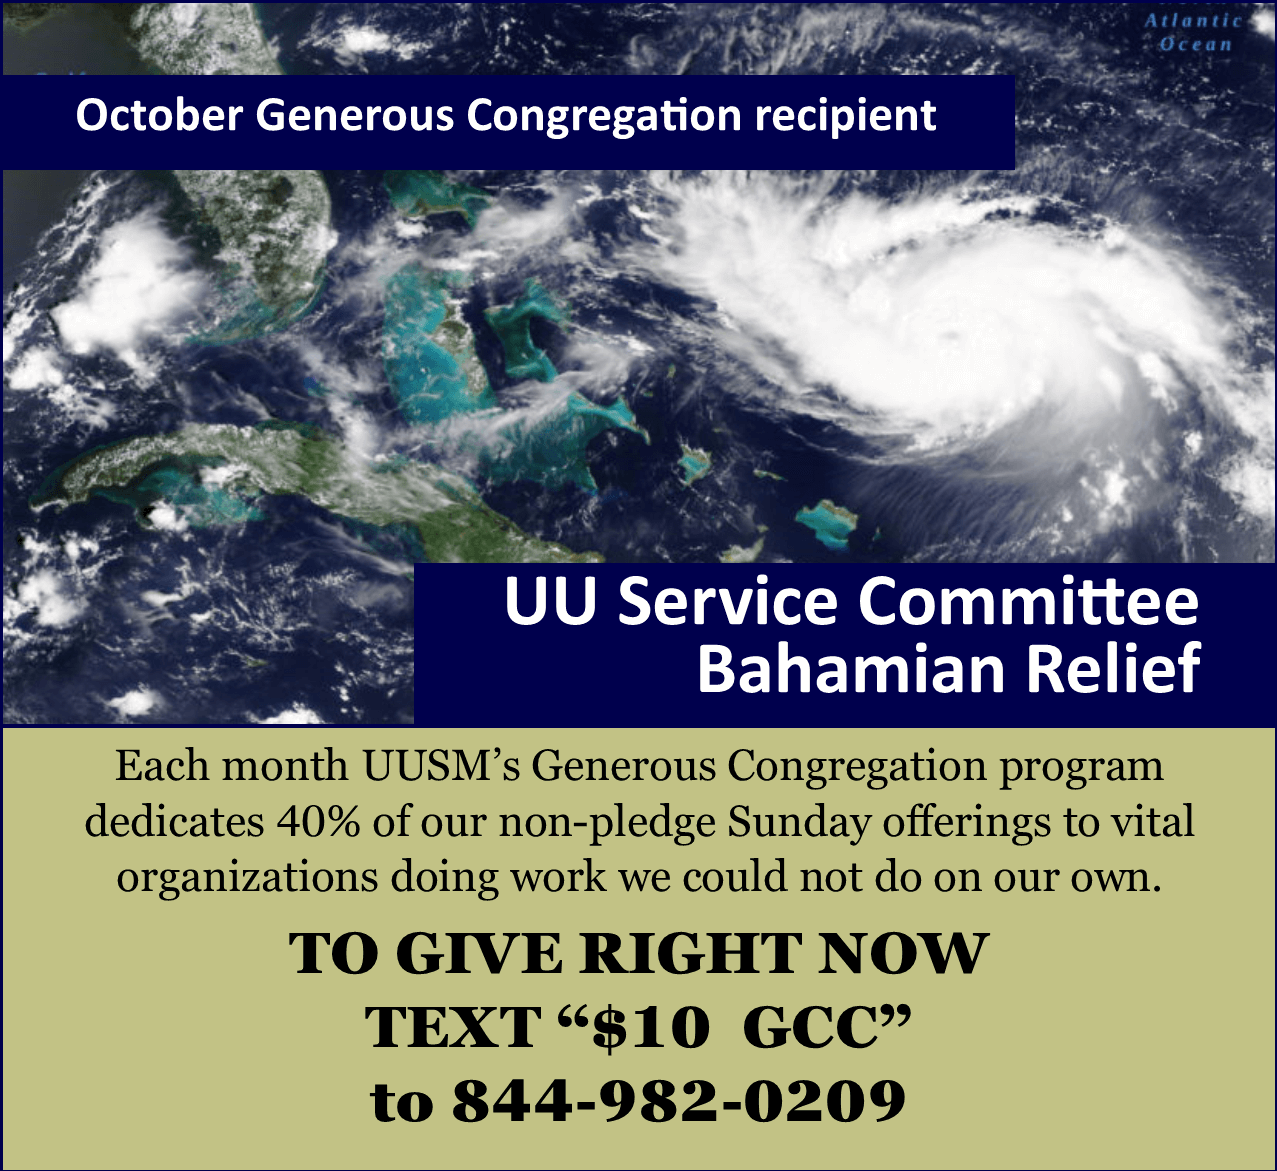 Give to UUSM and UU Service Committee